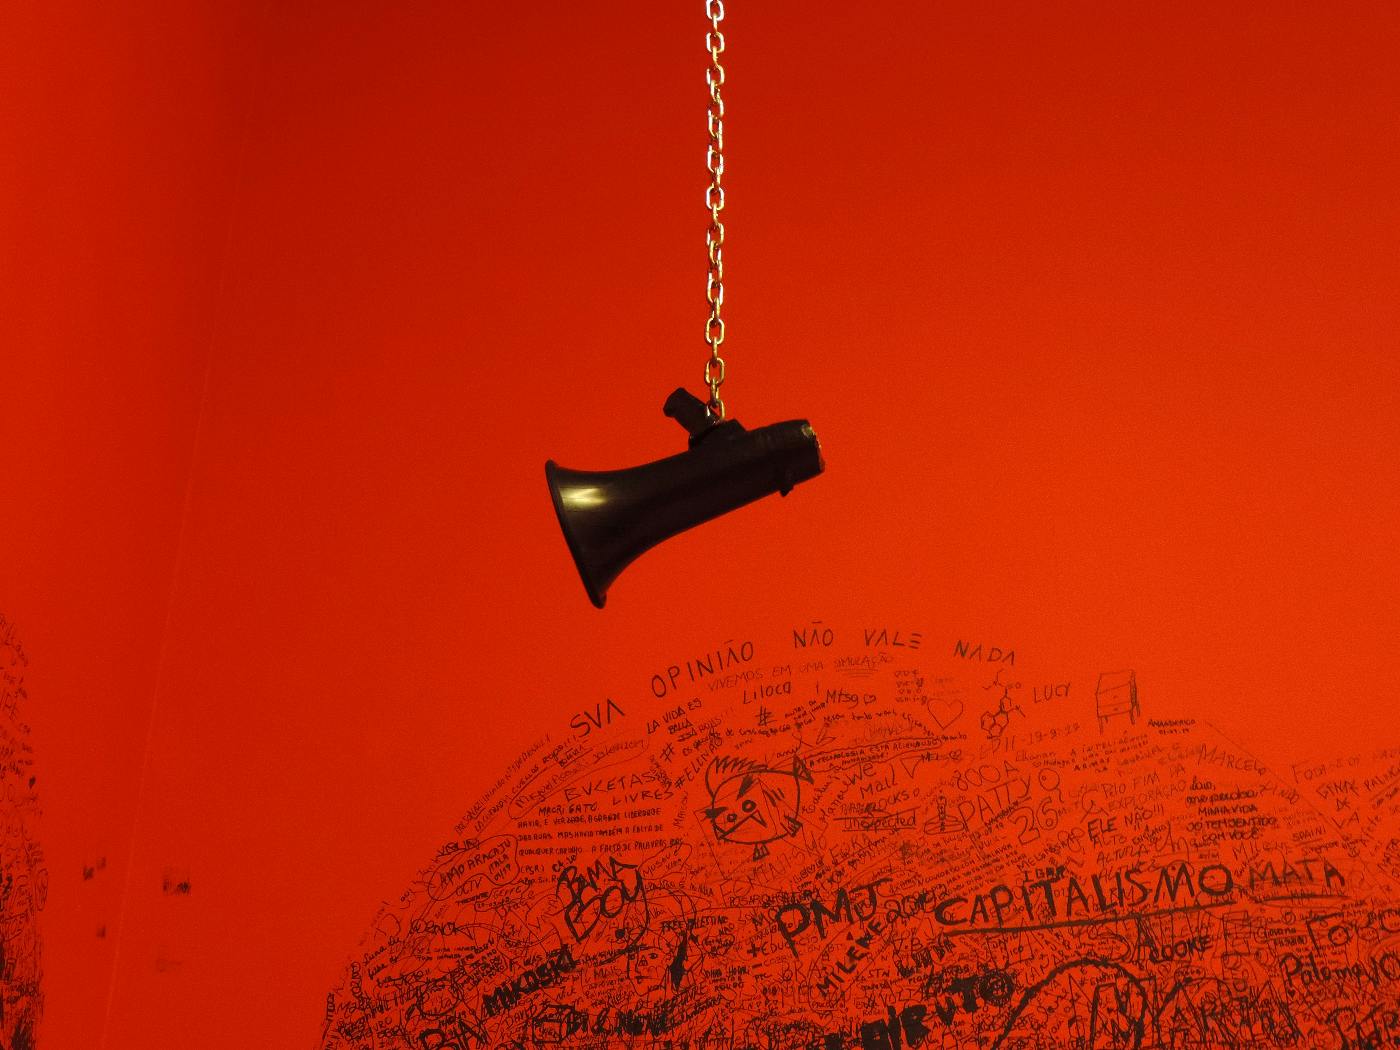 A magaphone hanging at the end of a chain against a red graffitied wall